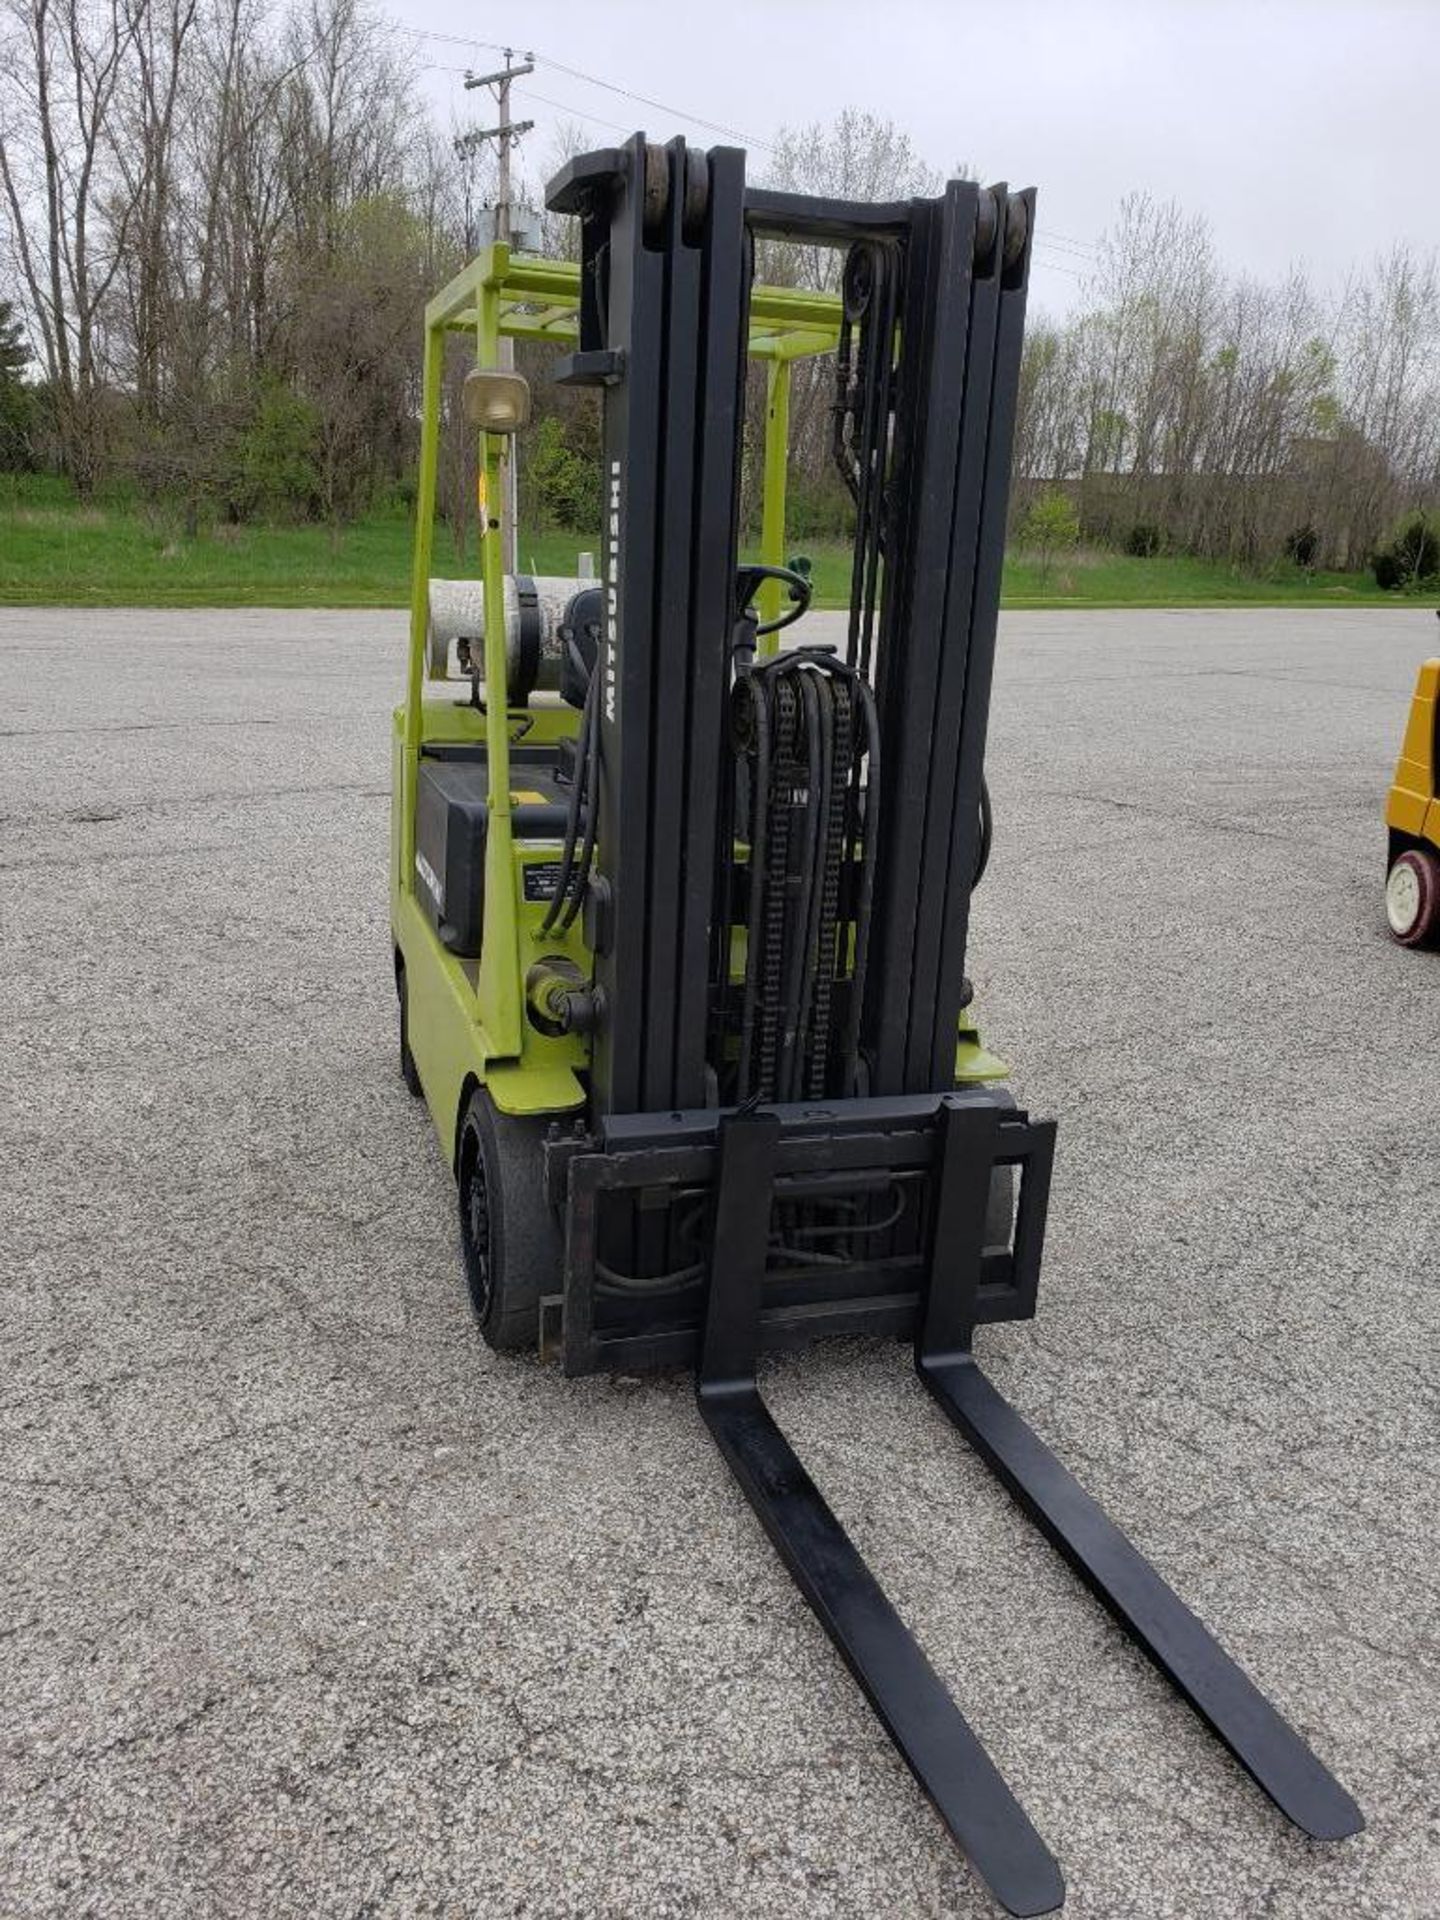 5000lb Mitsubishi propane forklift. Model FGC25. 189" lift height. Triple stage mast with sideshift. - Image 2 of 13